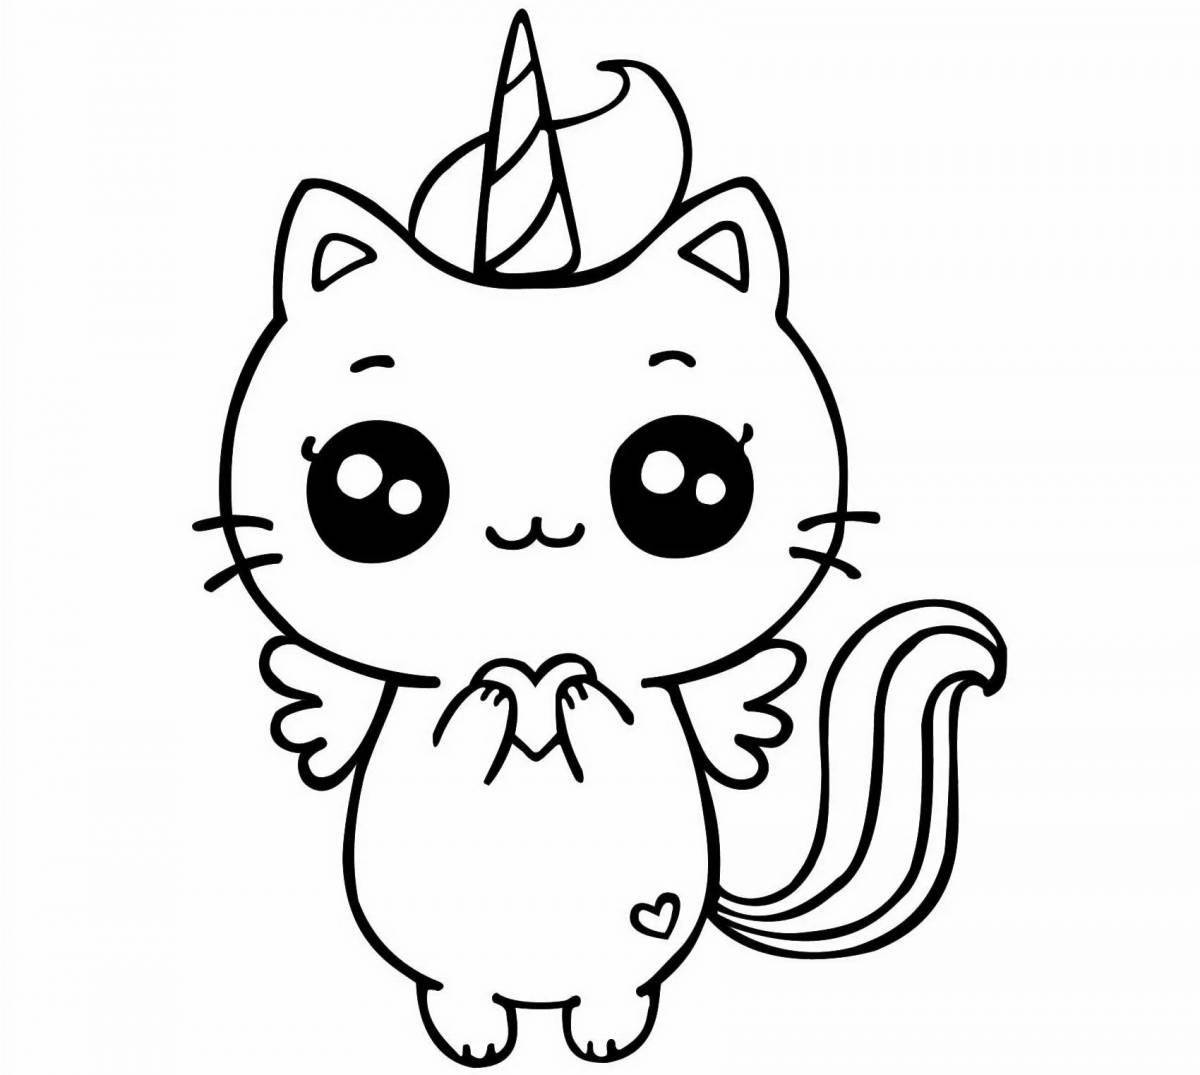 Cute unicorn cat coloring pages for girls